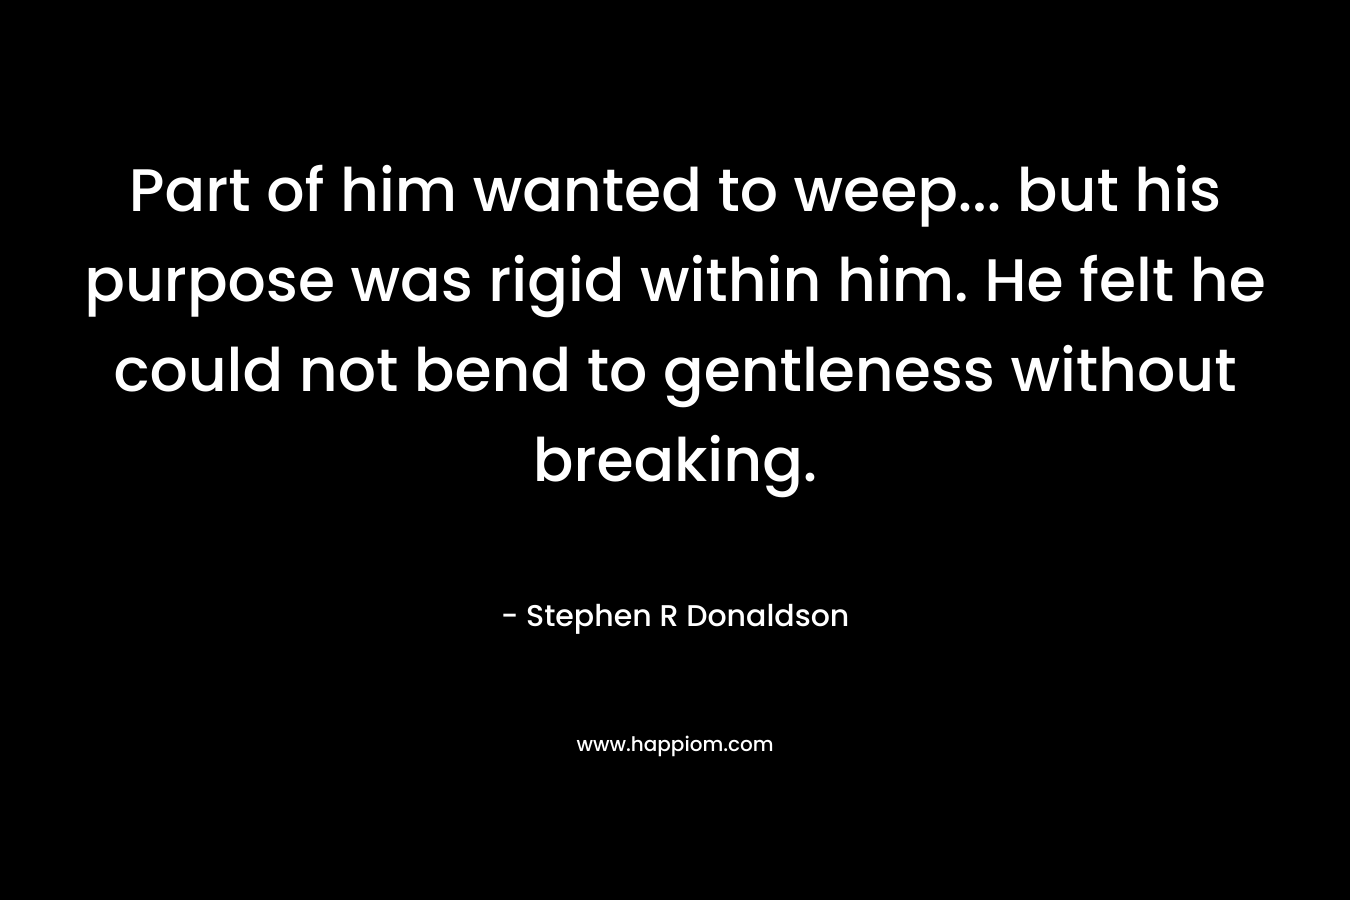 Part of him wanted to weep… but his purpose was rigid within him. He felt he could not bend to gentleness without breaking. – Stephen R Donaldson